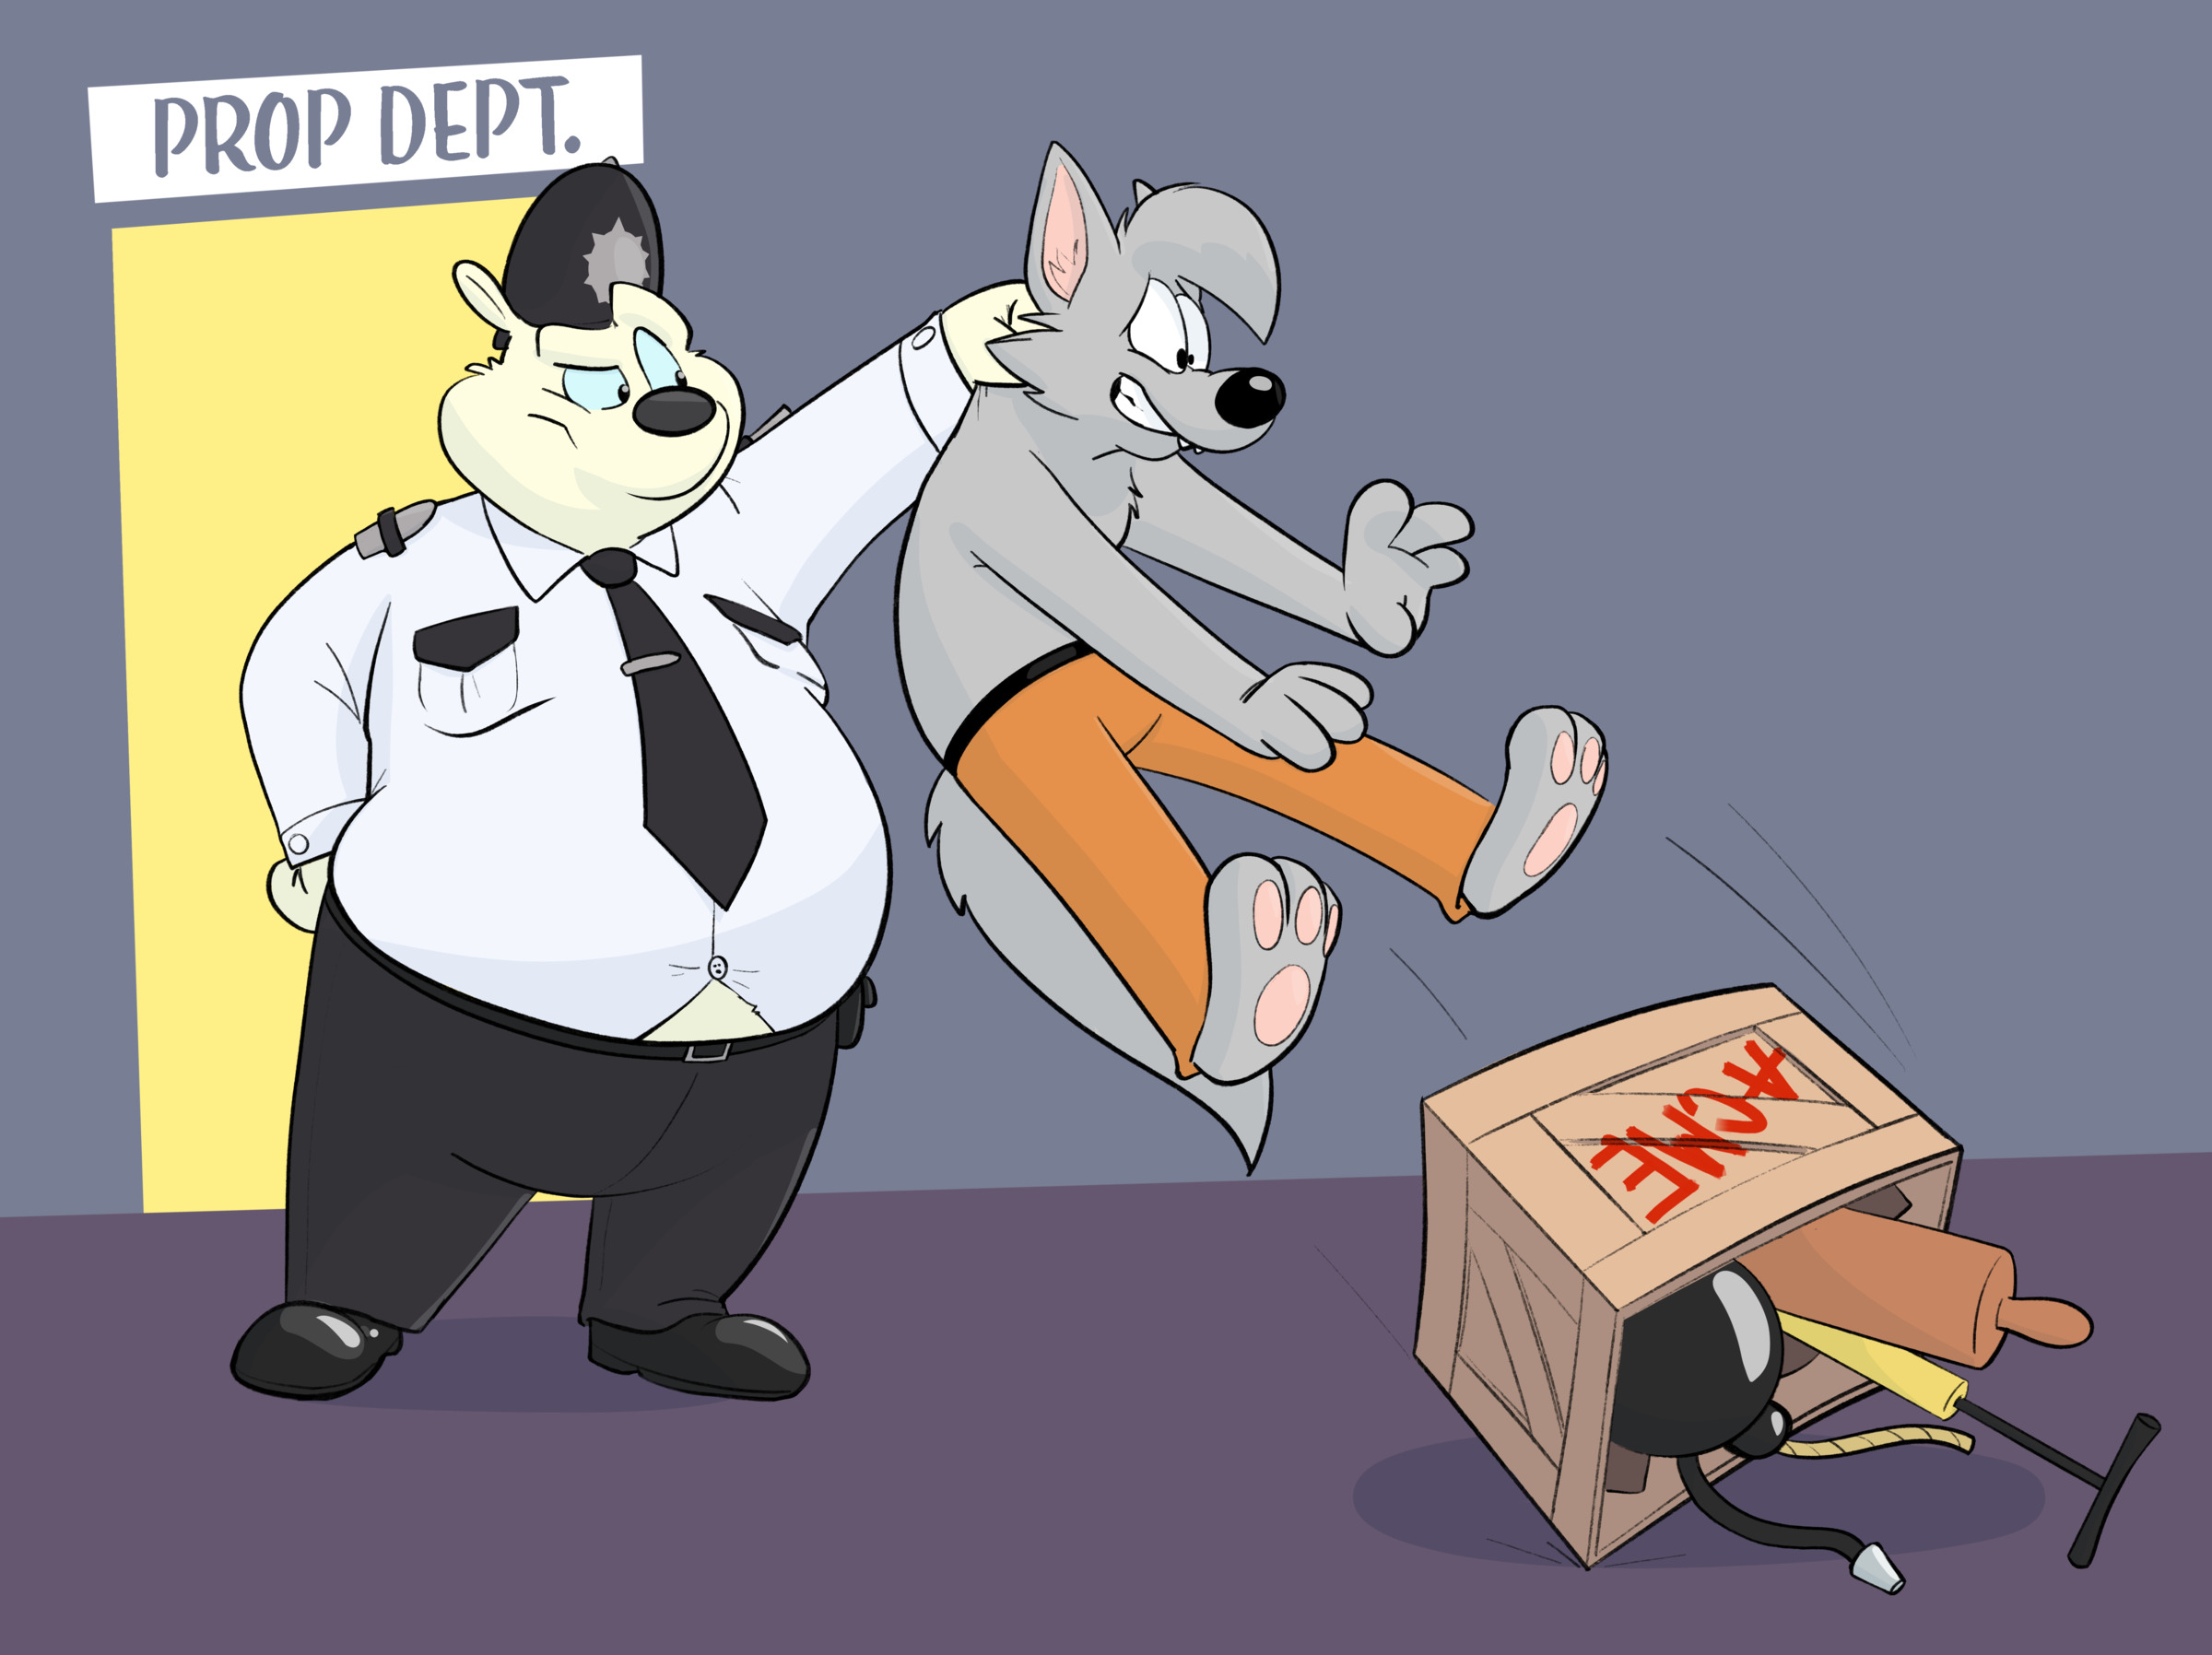 A drawing of a police officer polar bear holding up a cartoon wolf by the scruff, having dropped a large box of cartoon props.